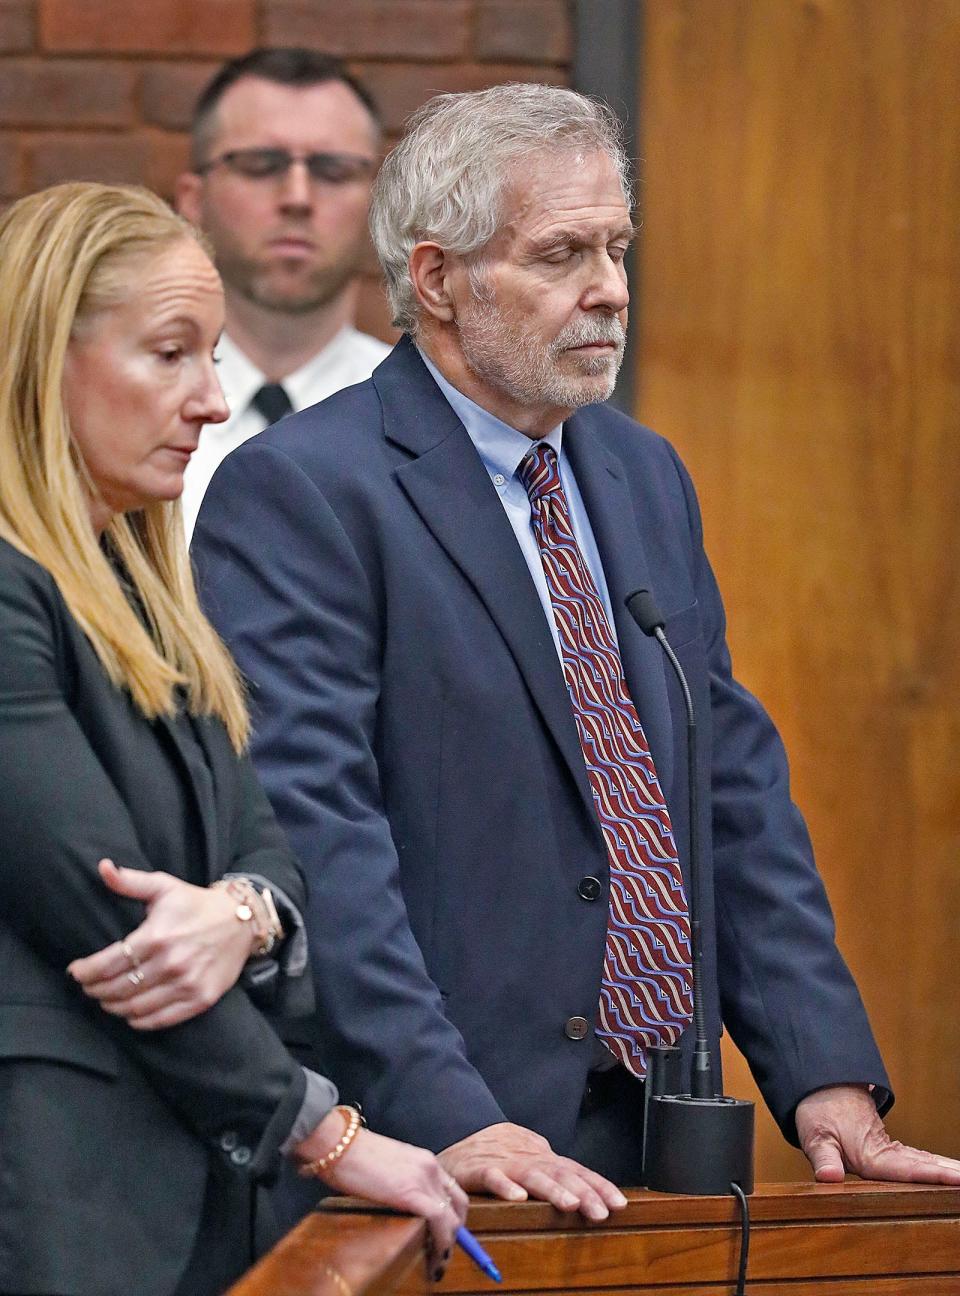 Defense lawyer Kelli Porges, left, and her client, former Norwell pediatrician Richard Kauff, listen during his arraignment in Hingham District Court on Monday, Nov. 20, 2023, on charges of sexual assault.